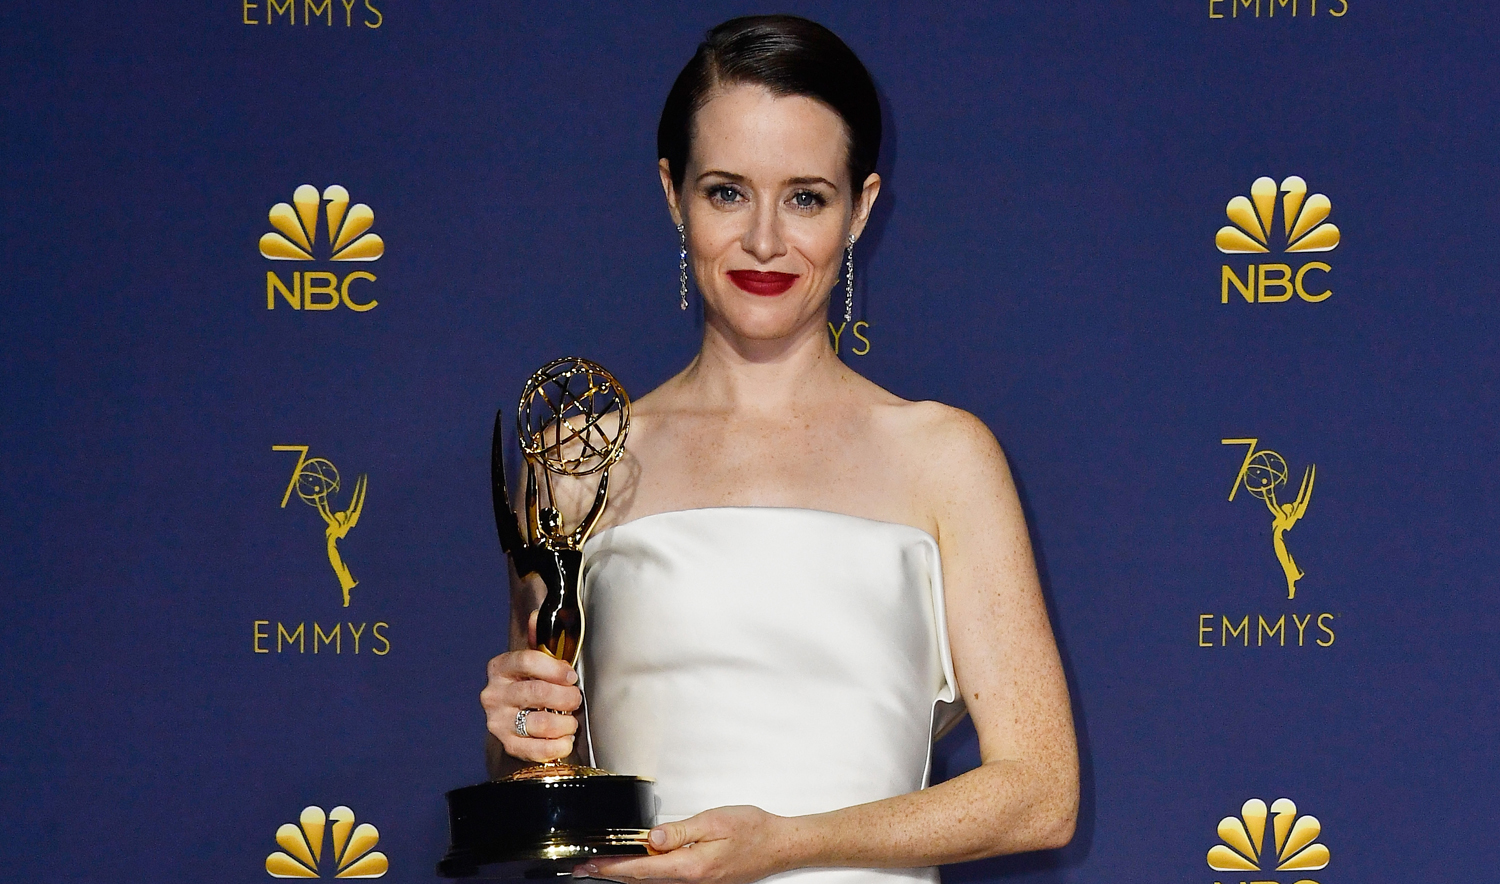 Actress Claire Foy wins second Emmy for her portrayal of Queen Elizabeth II in ‘The Crown’